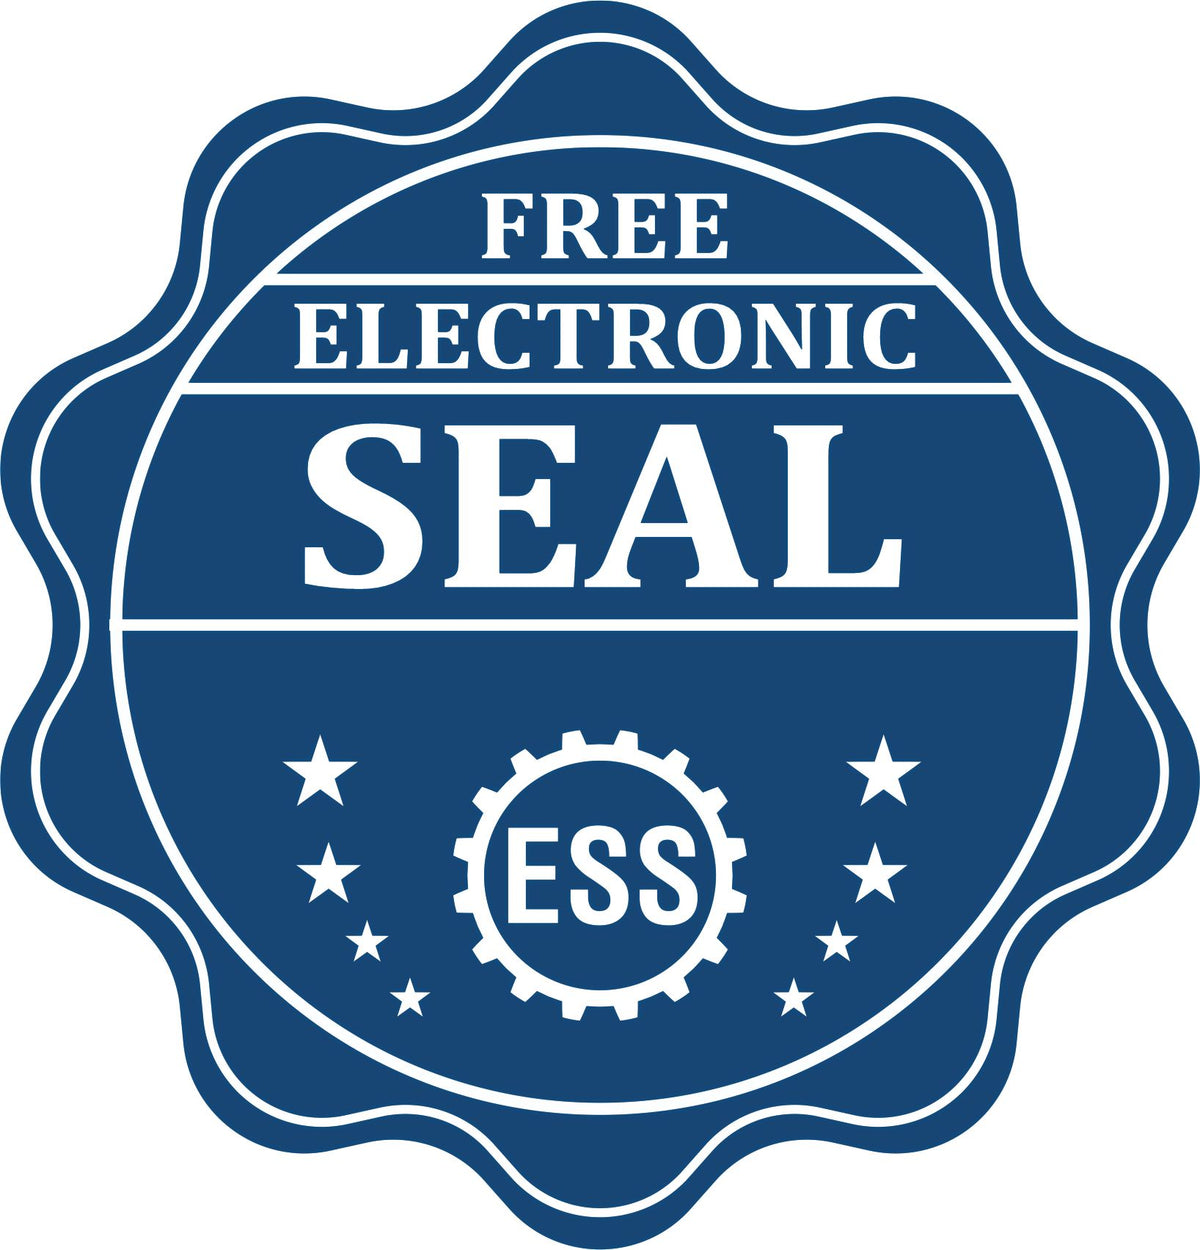 A badge showing a free electronic seal for the Michigan Engineer Desk Seal with stars and the ESS gear on the emblem.